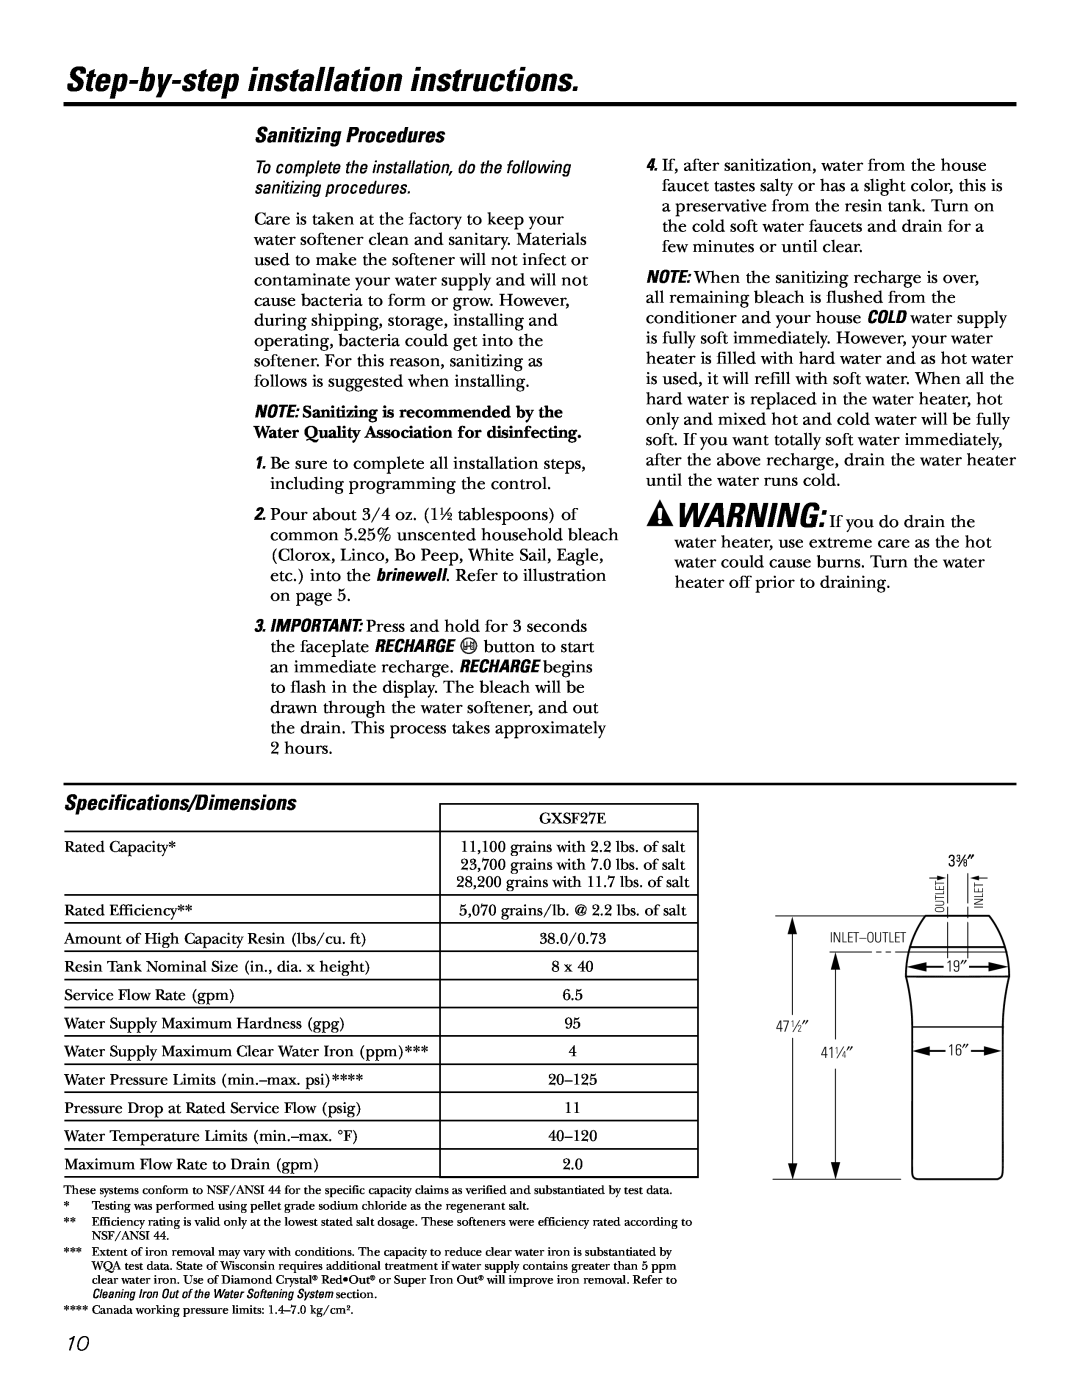 GE GXSF27E manual Step-by-stepinstallation instructions, Sanitizing Procedures, Specifications/Dimensions 